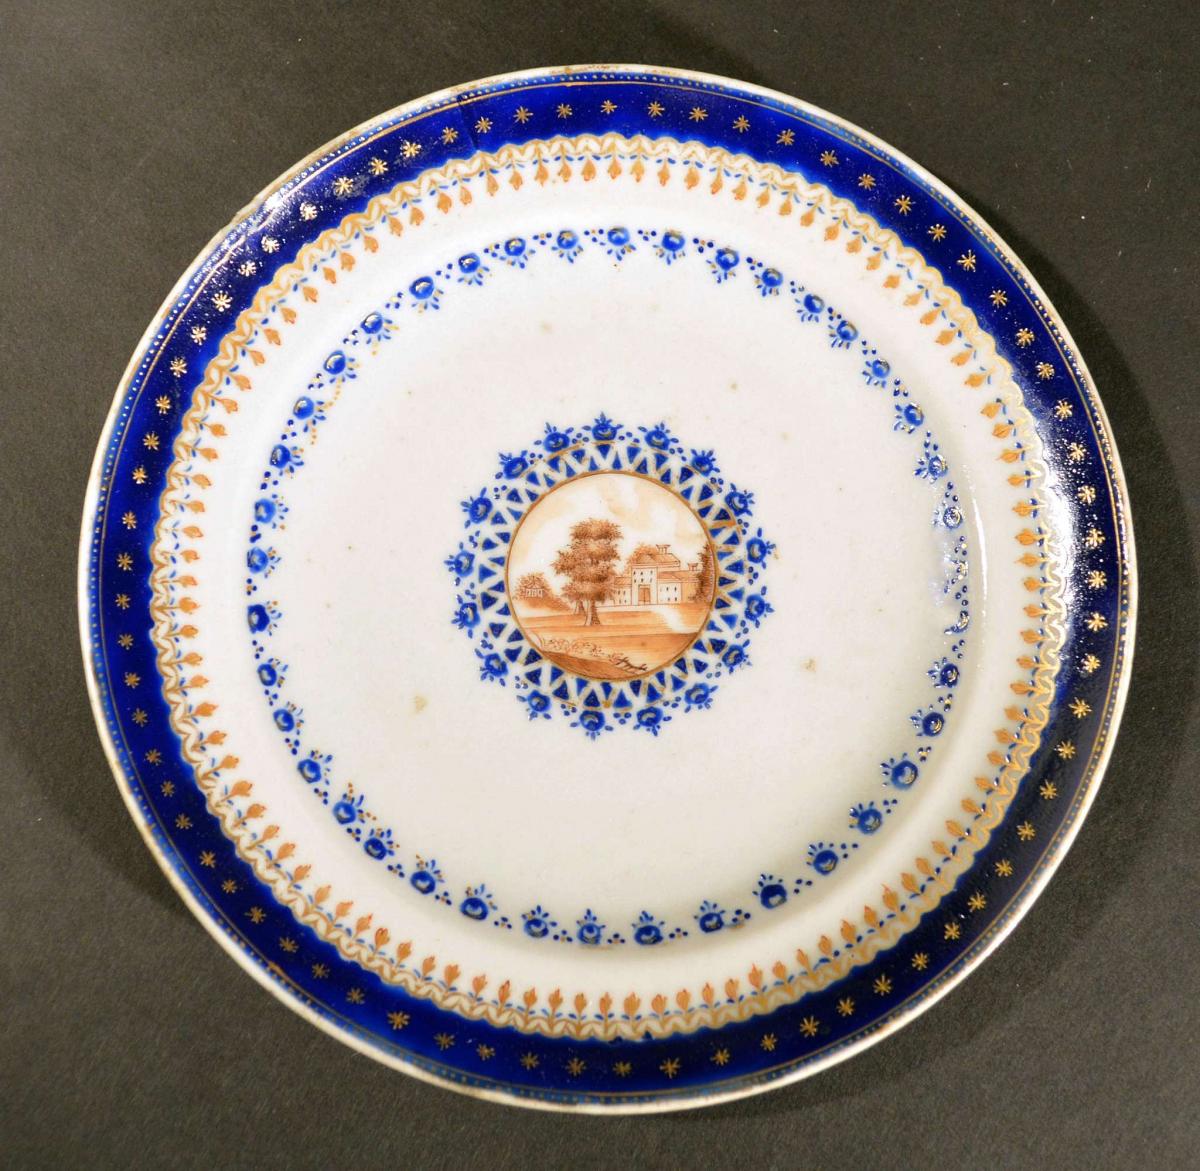 Chinese Export Porcelain Blue Enamel Plate made for the American Market, Circa 1785